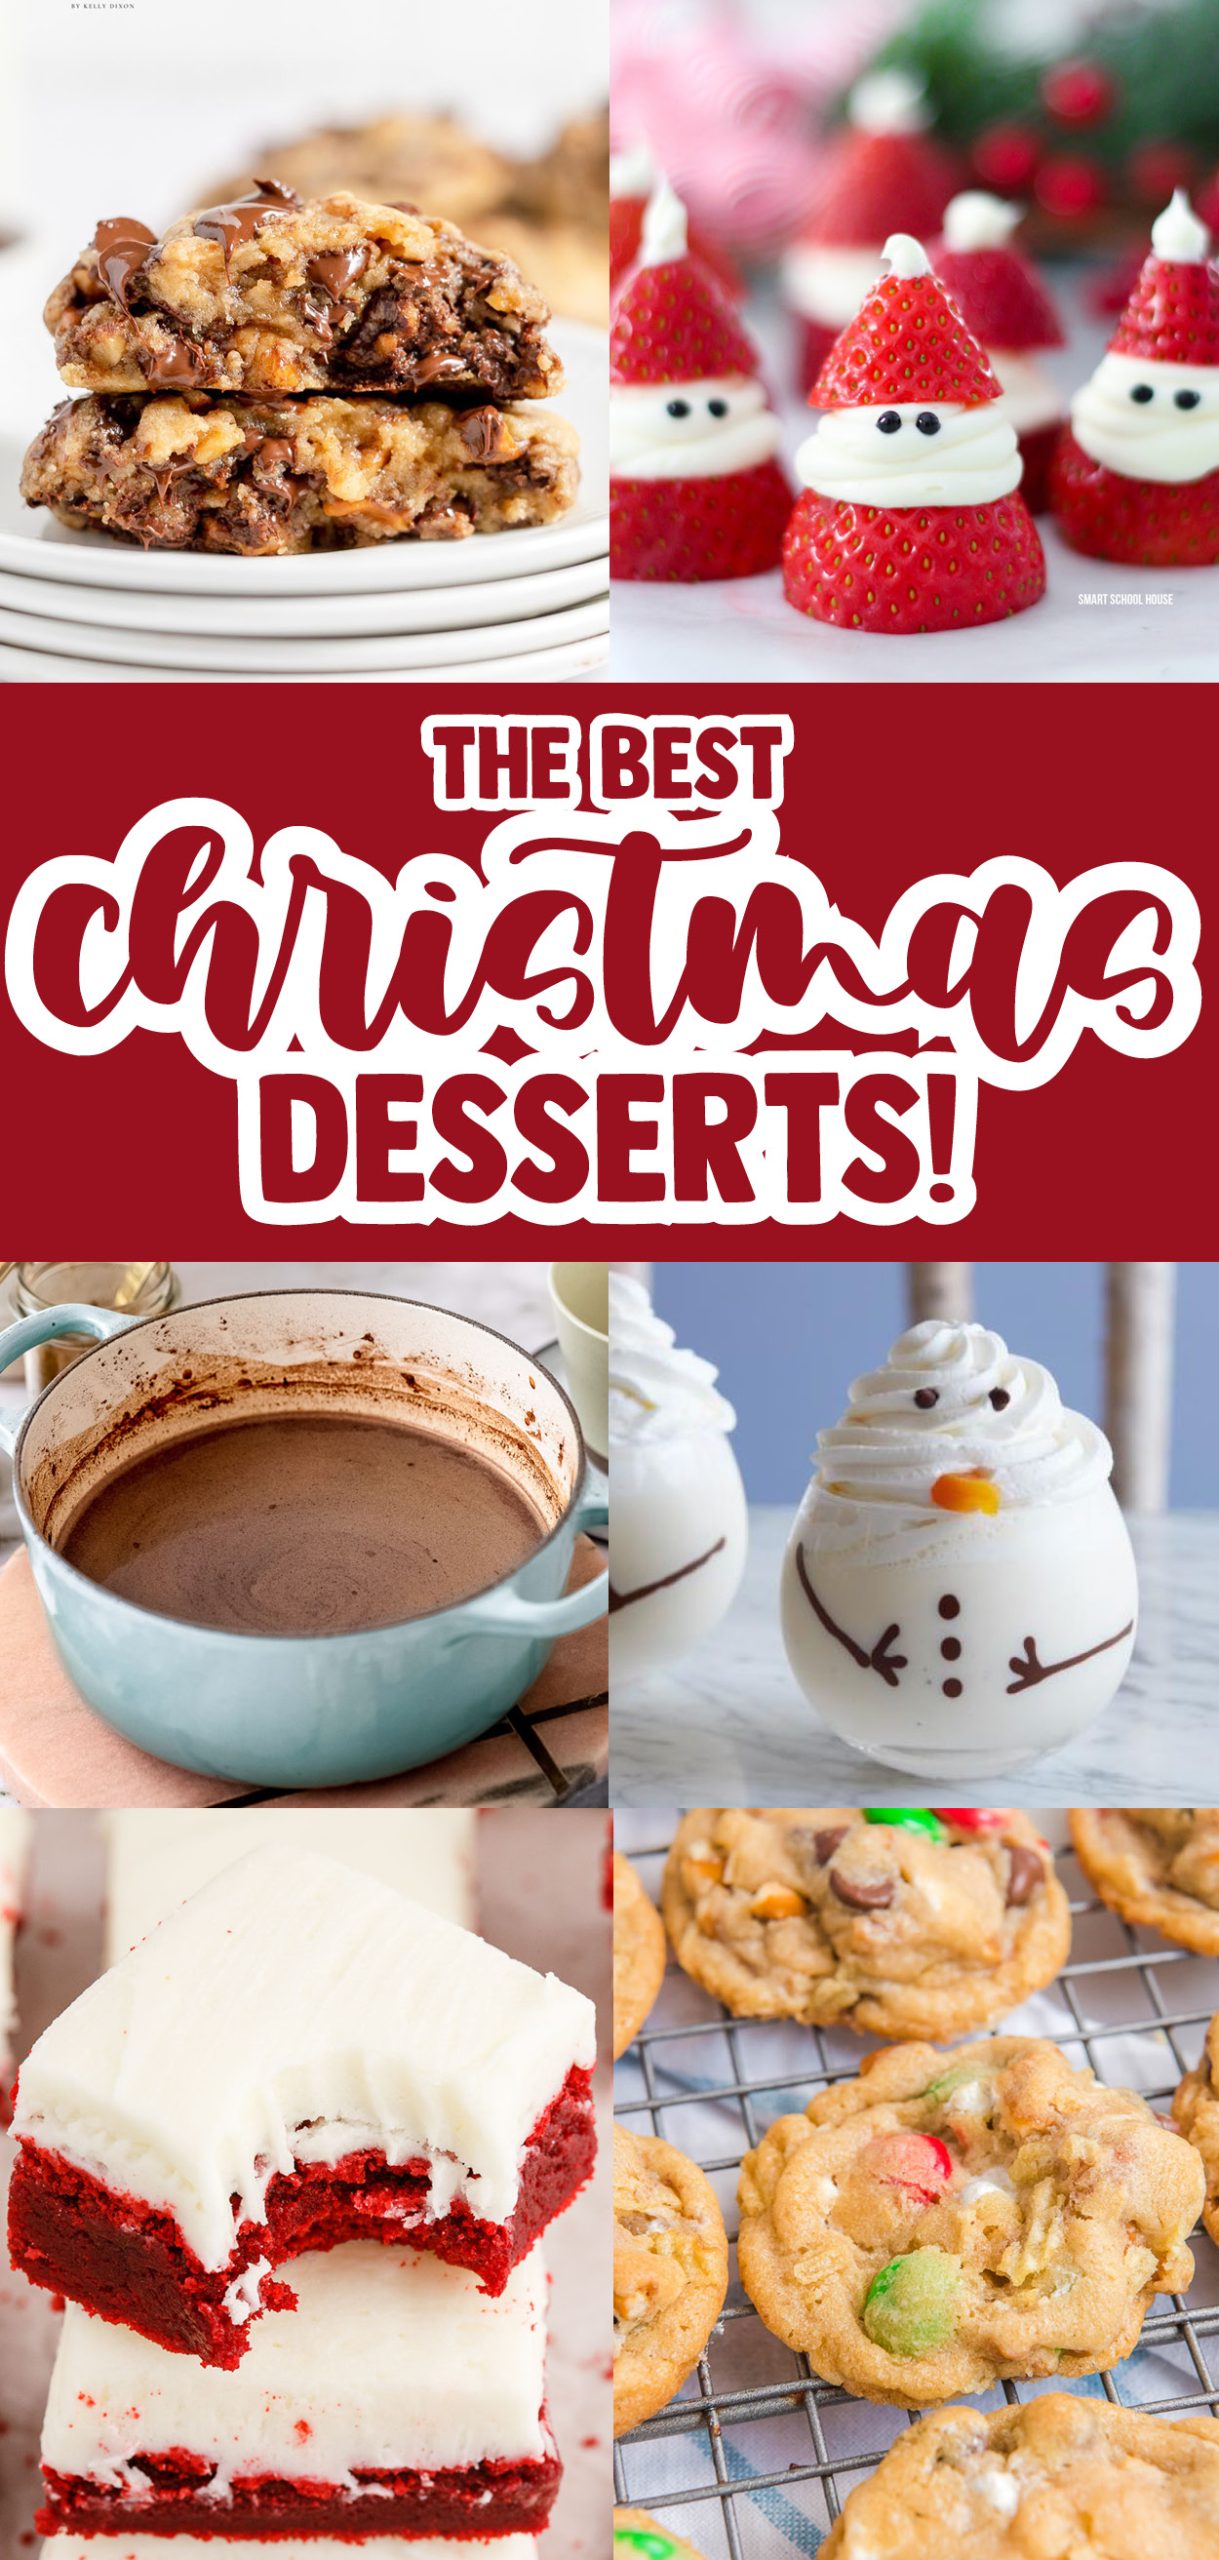 The best Christmas Dessert Recipes to share with you today! We love with holiday desserts! 'Tis the season to eat up, am I right?